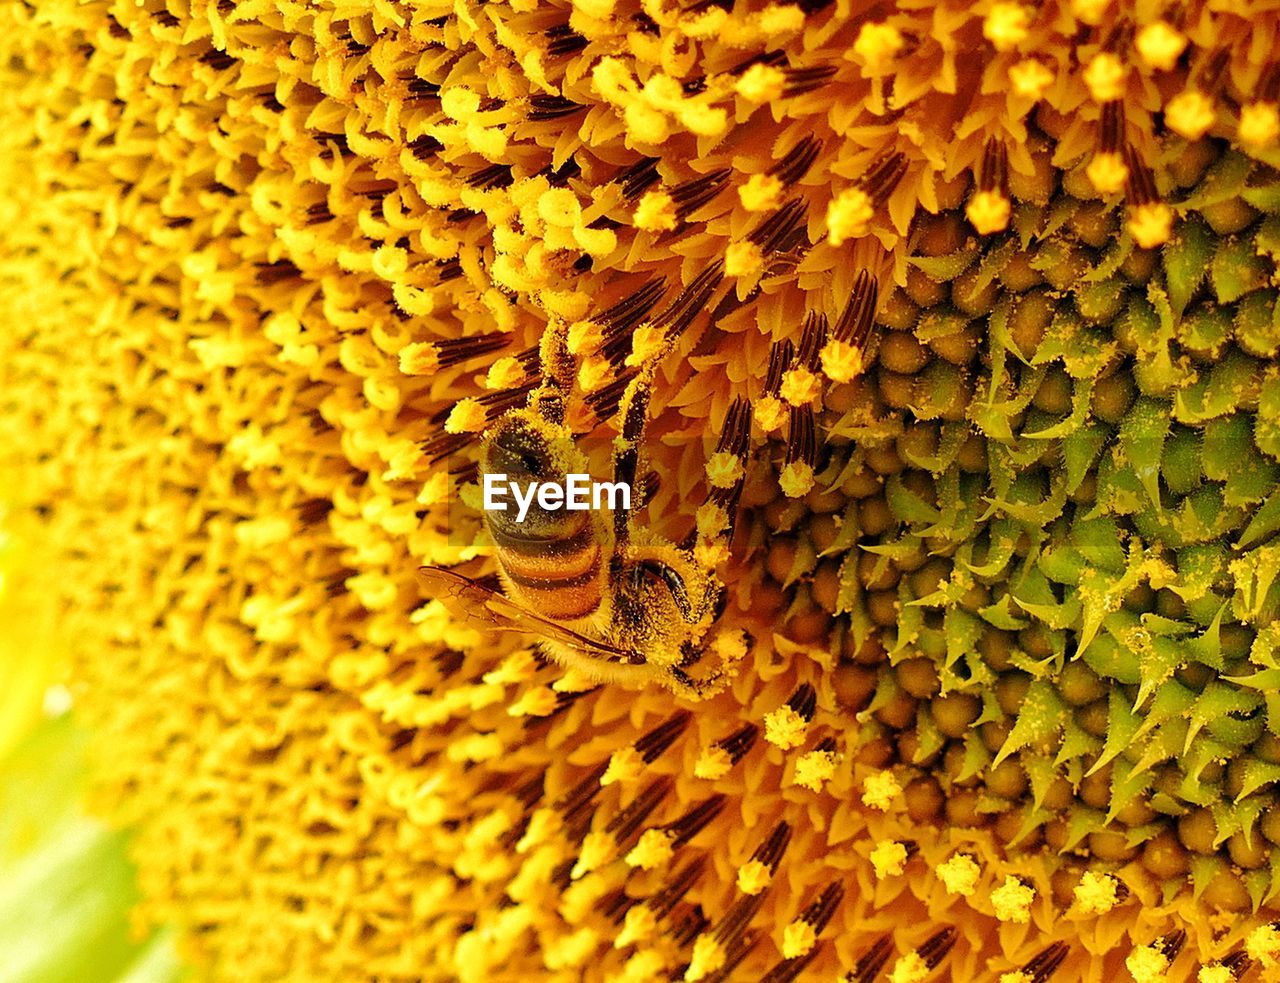 Extreme close-up of honey bee pollinating on flower